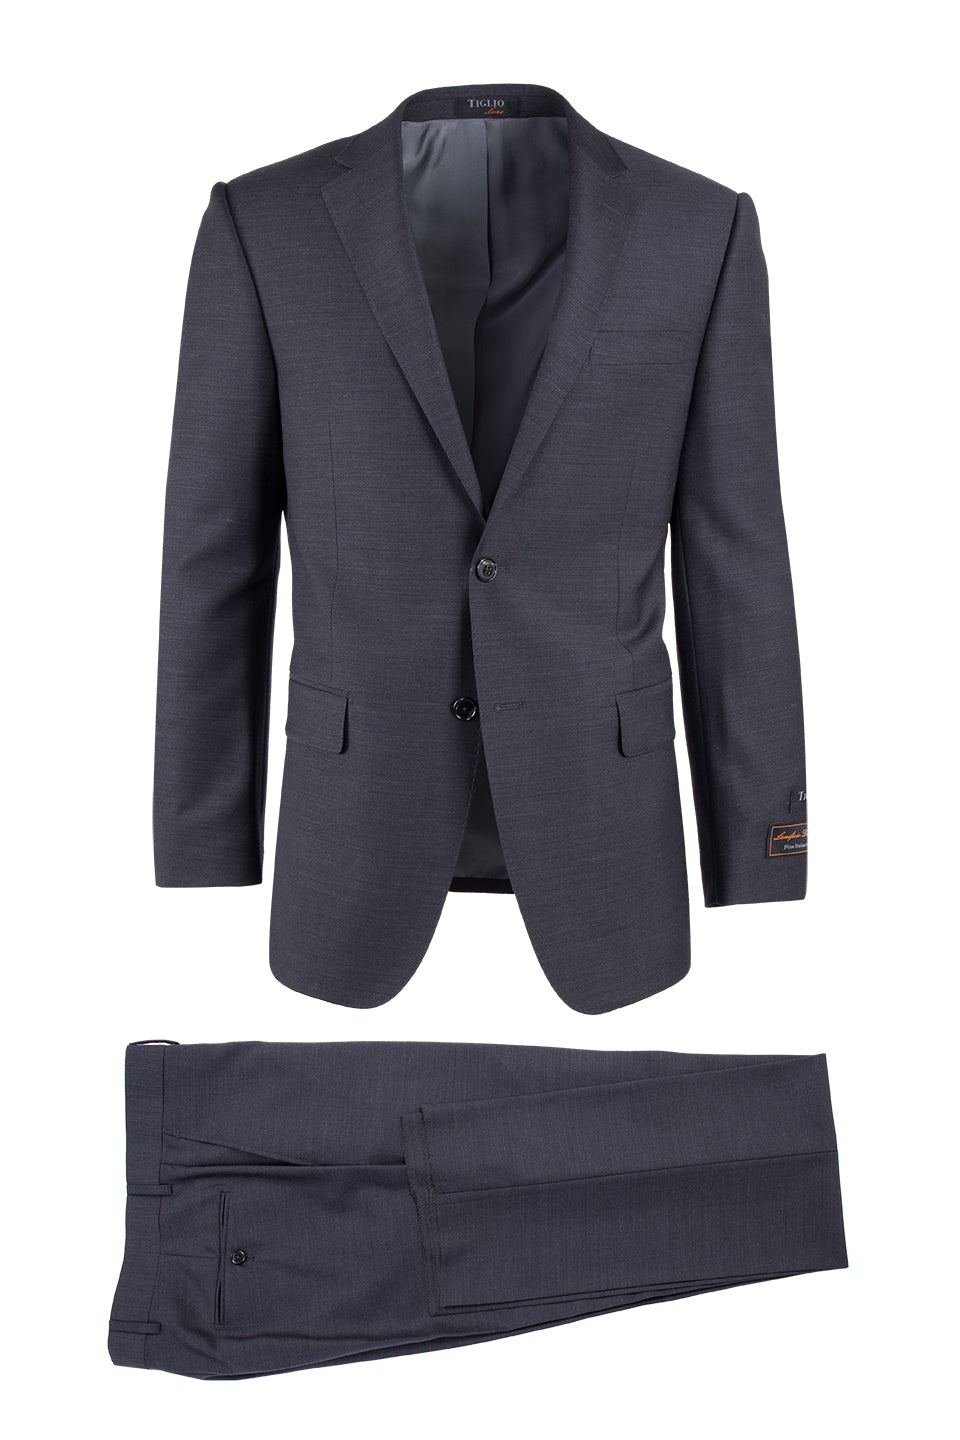 Novello Charcoal Gray, Modern Fit, Tiglio Tiglio | Wool Luxe Suit by Pure TIG10